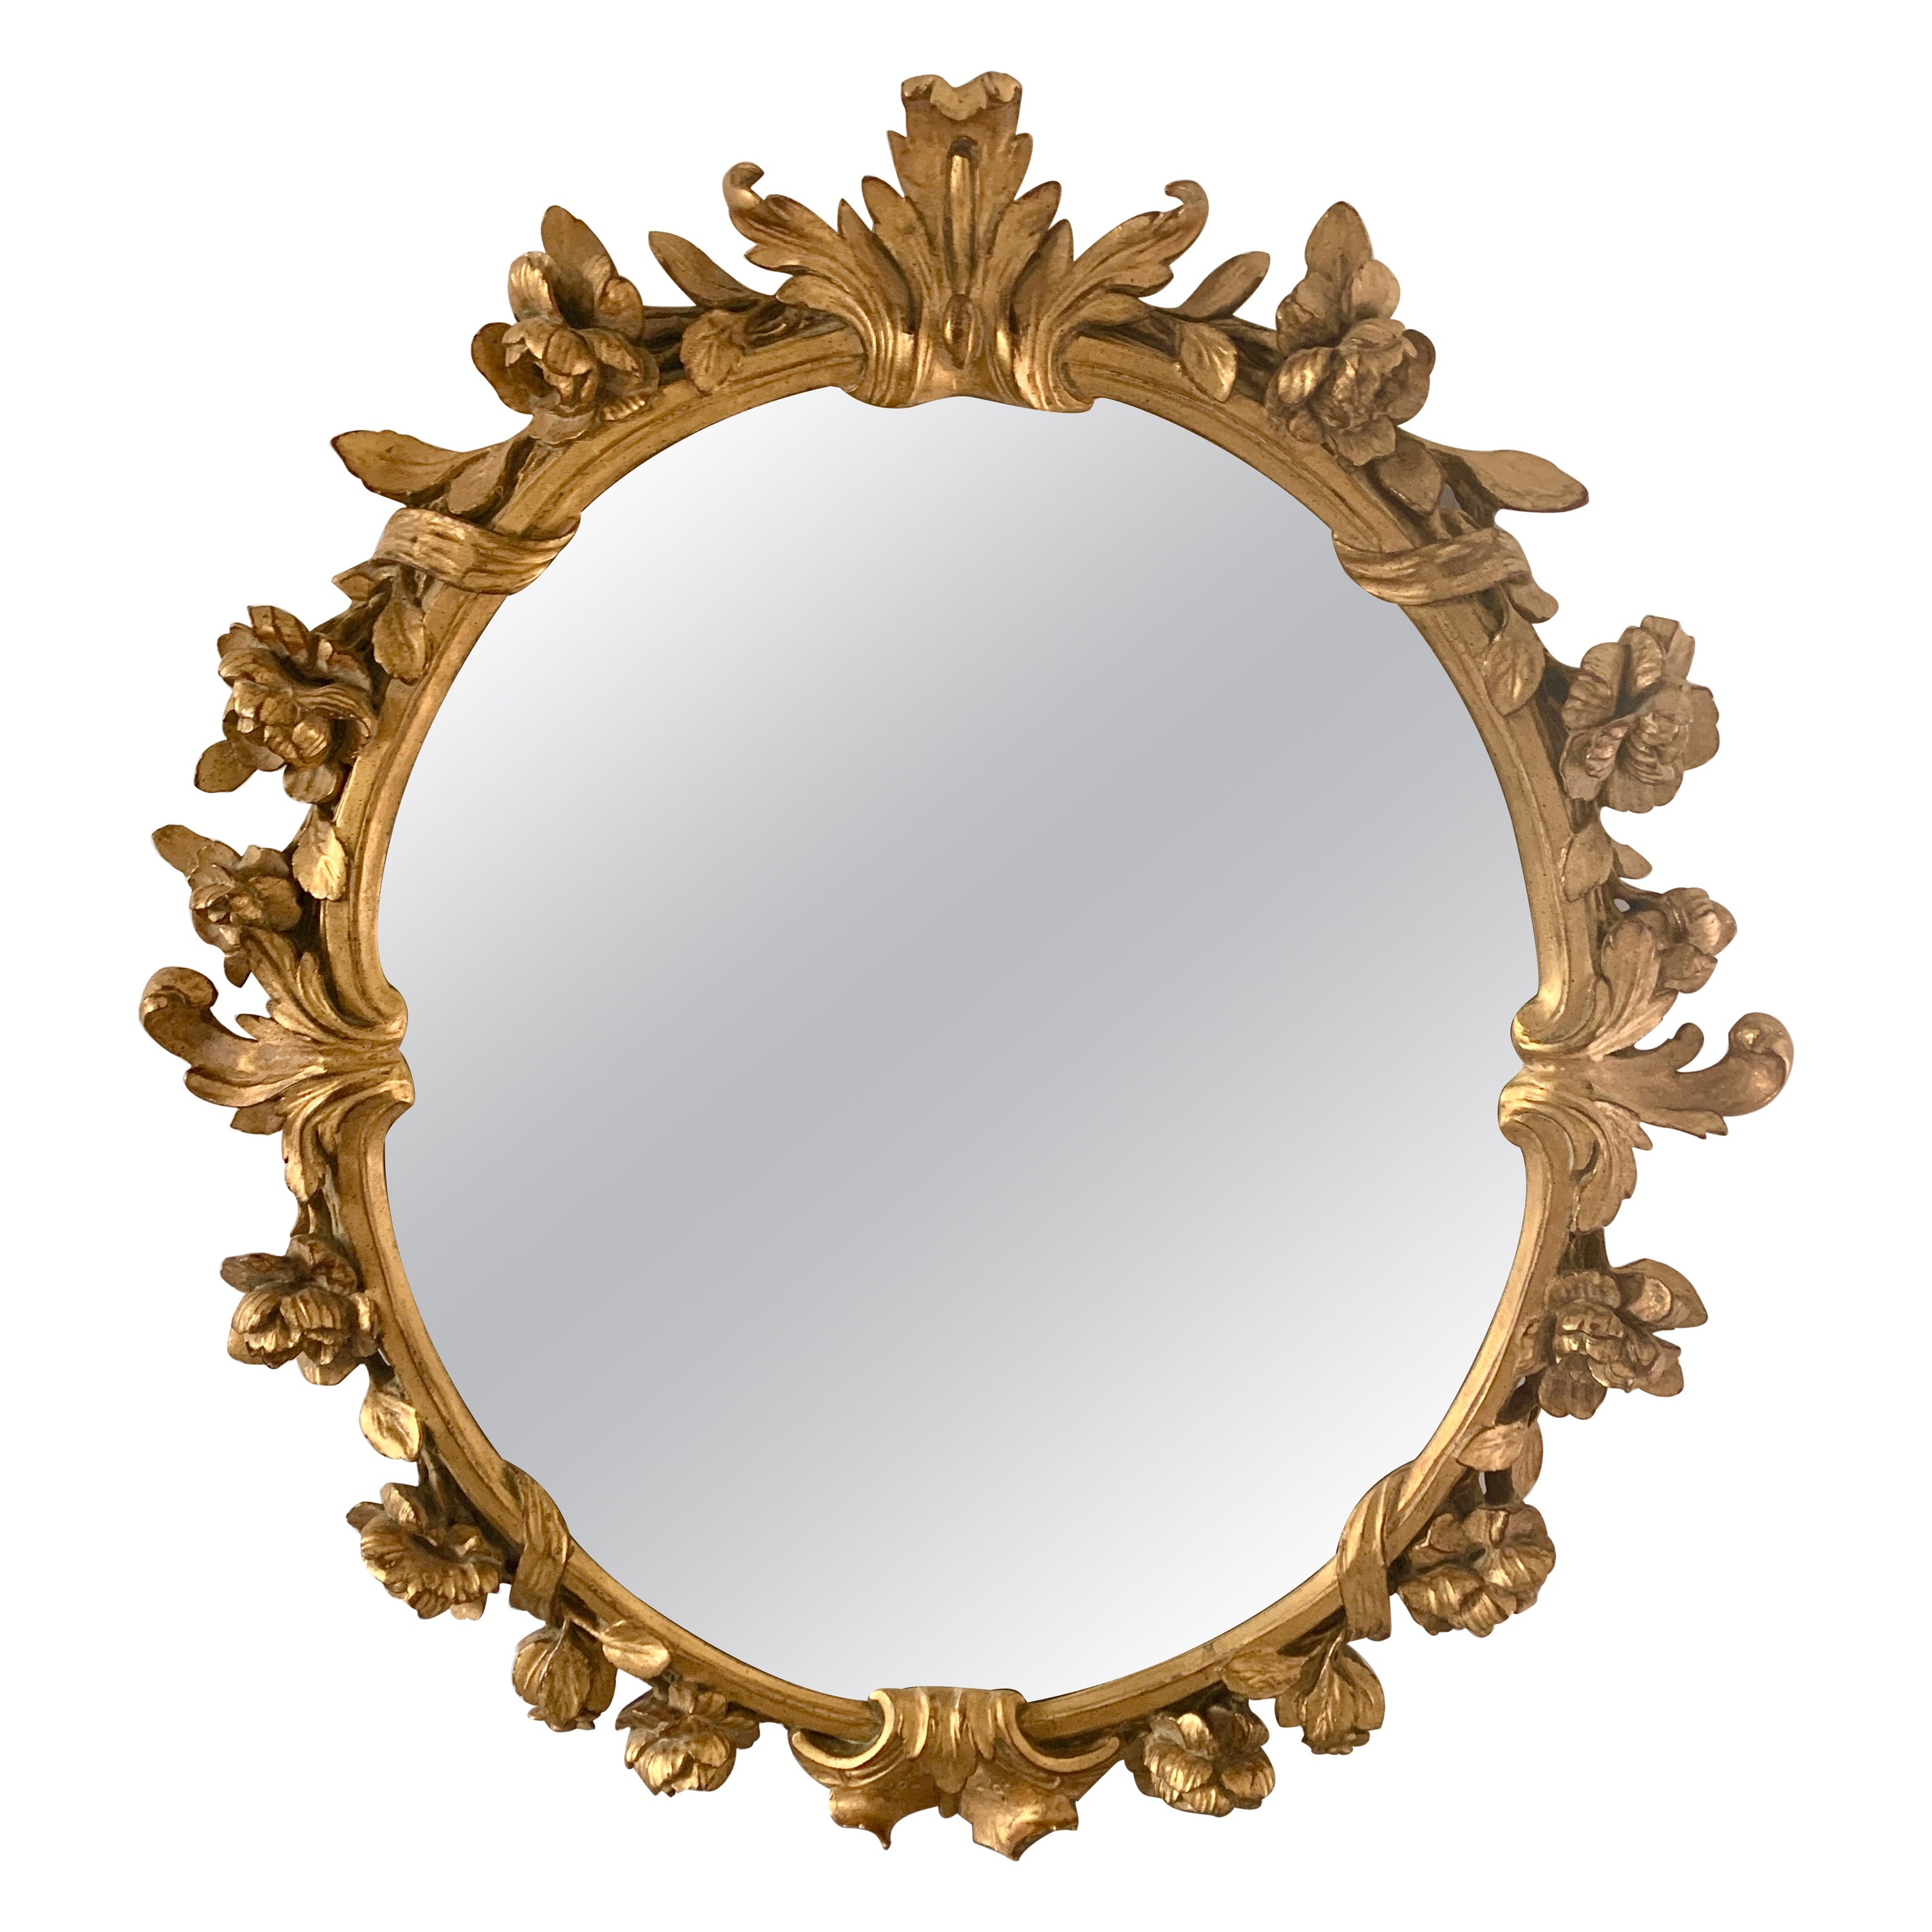 Italian Rococo Carved Giltwood Round Mirror